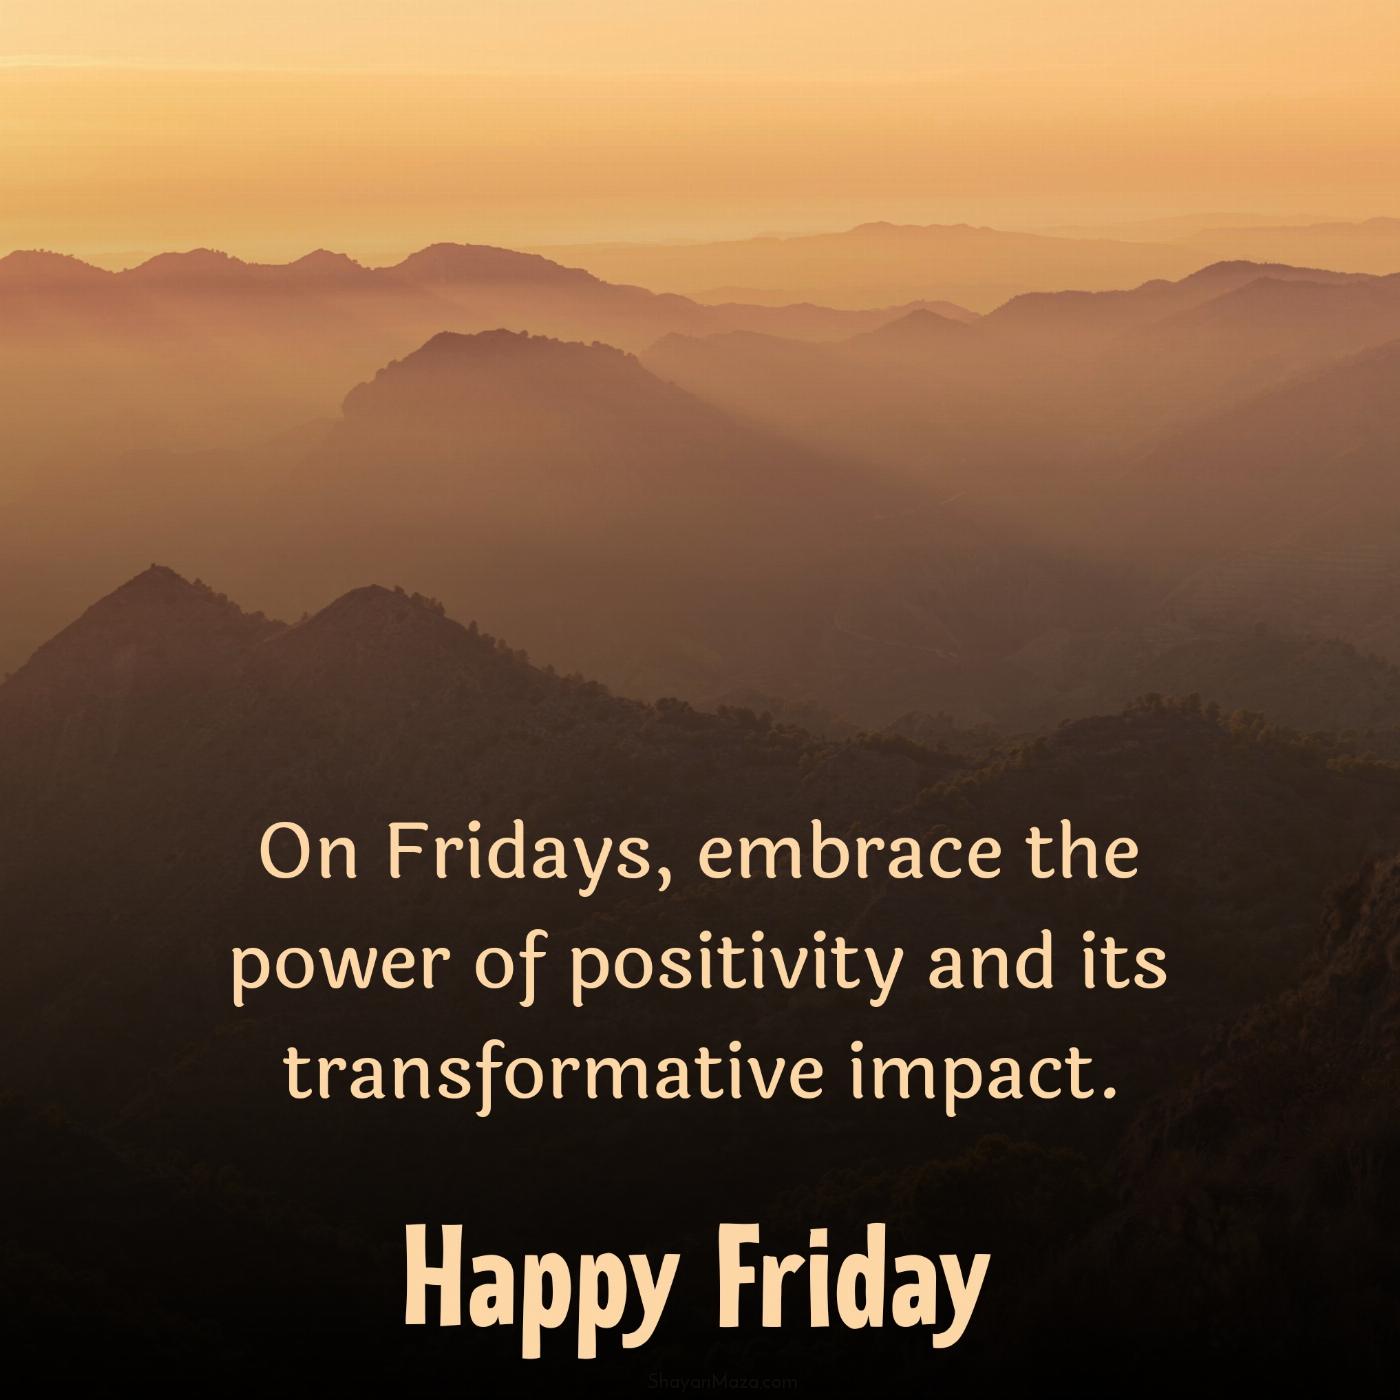 On Fridays embrace the power of positivity and its transformative impact